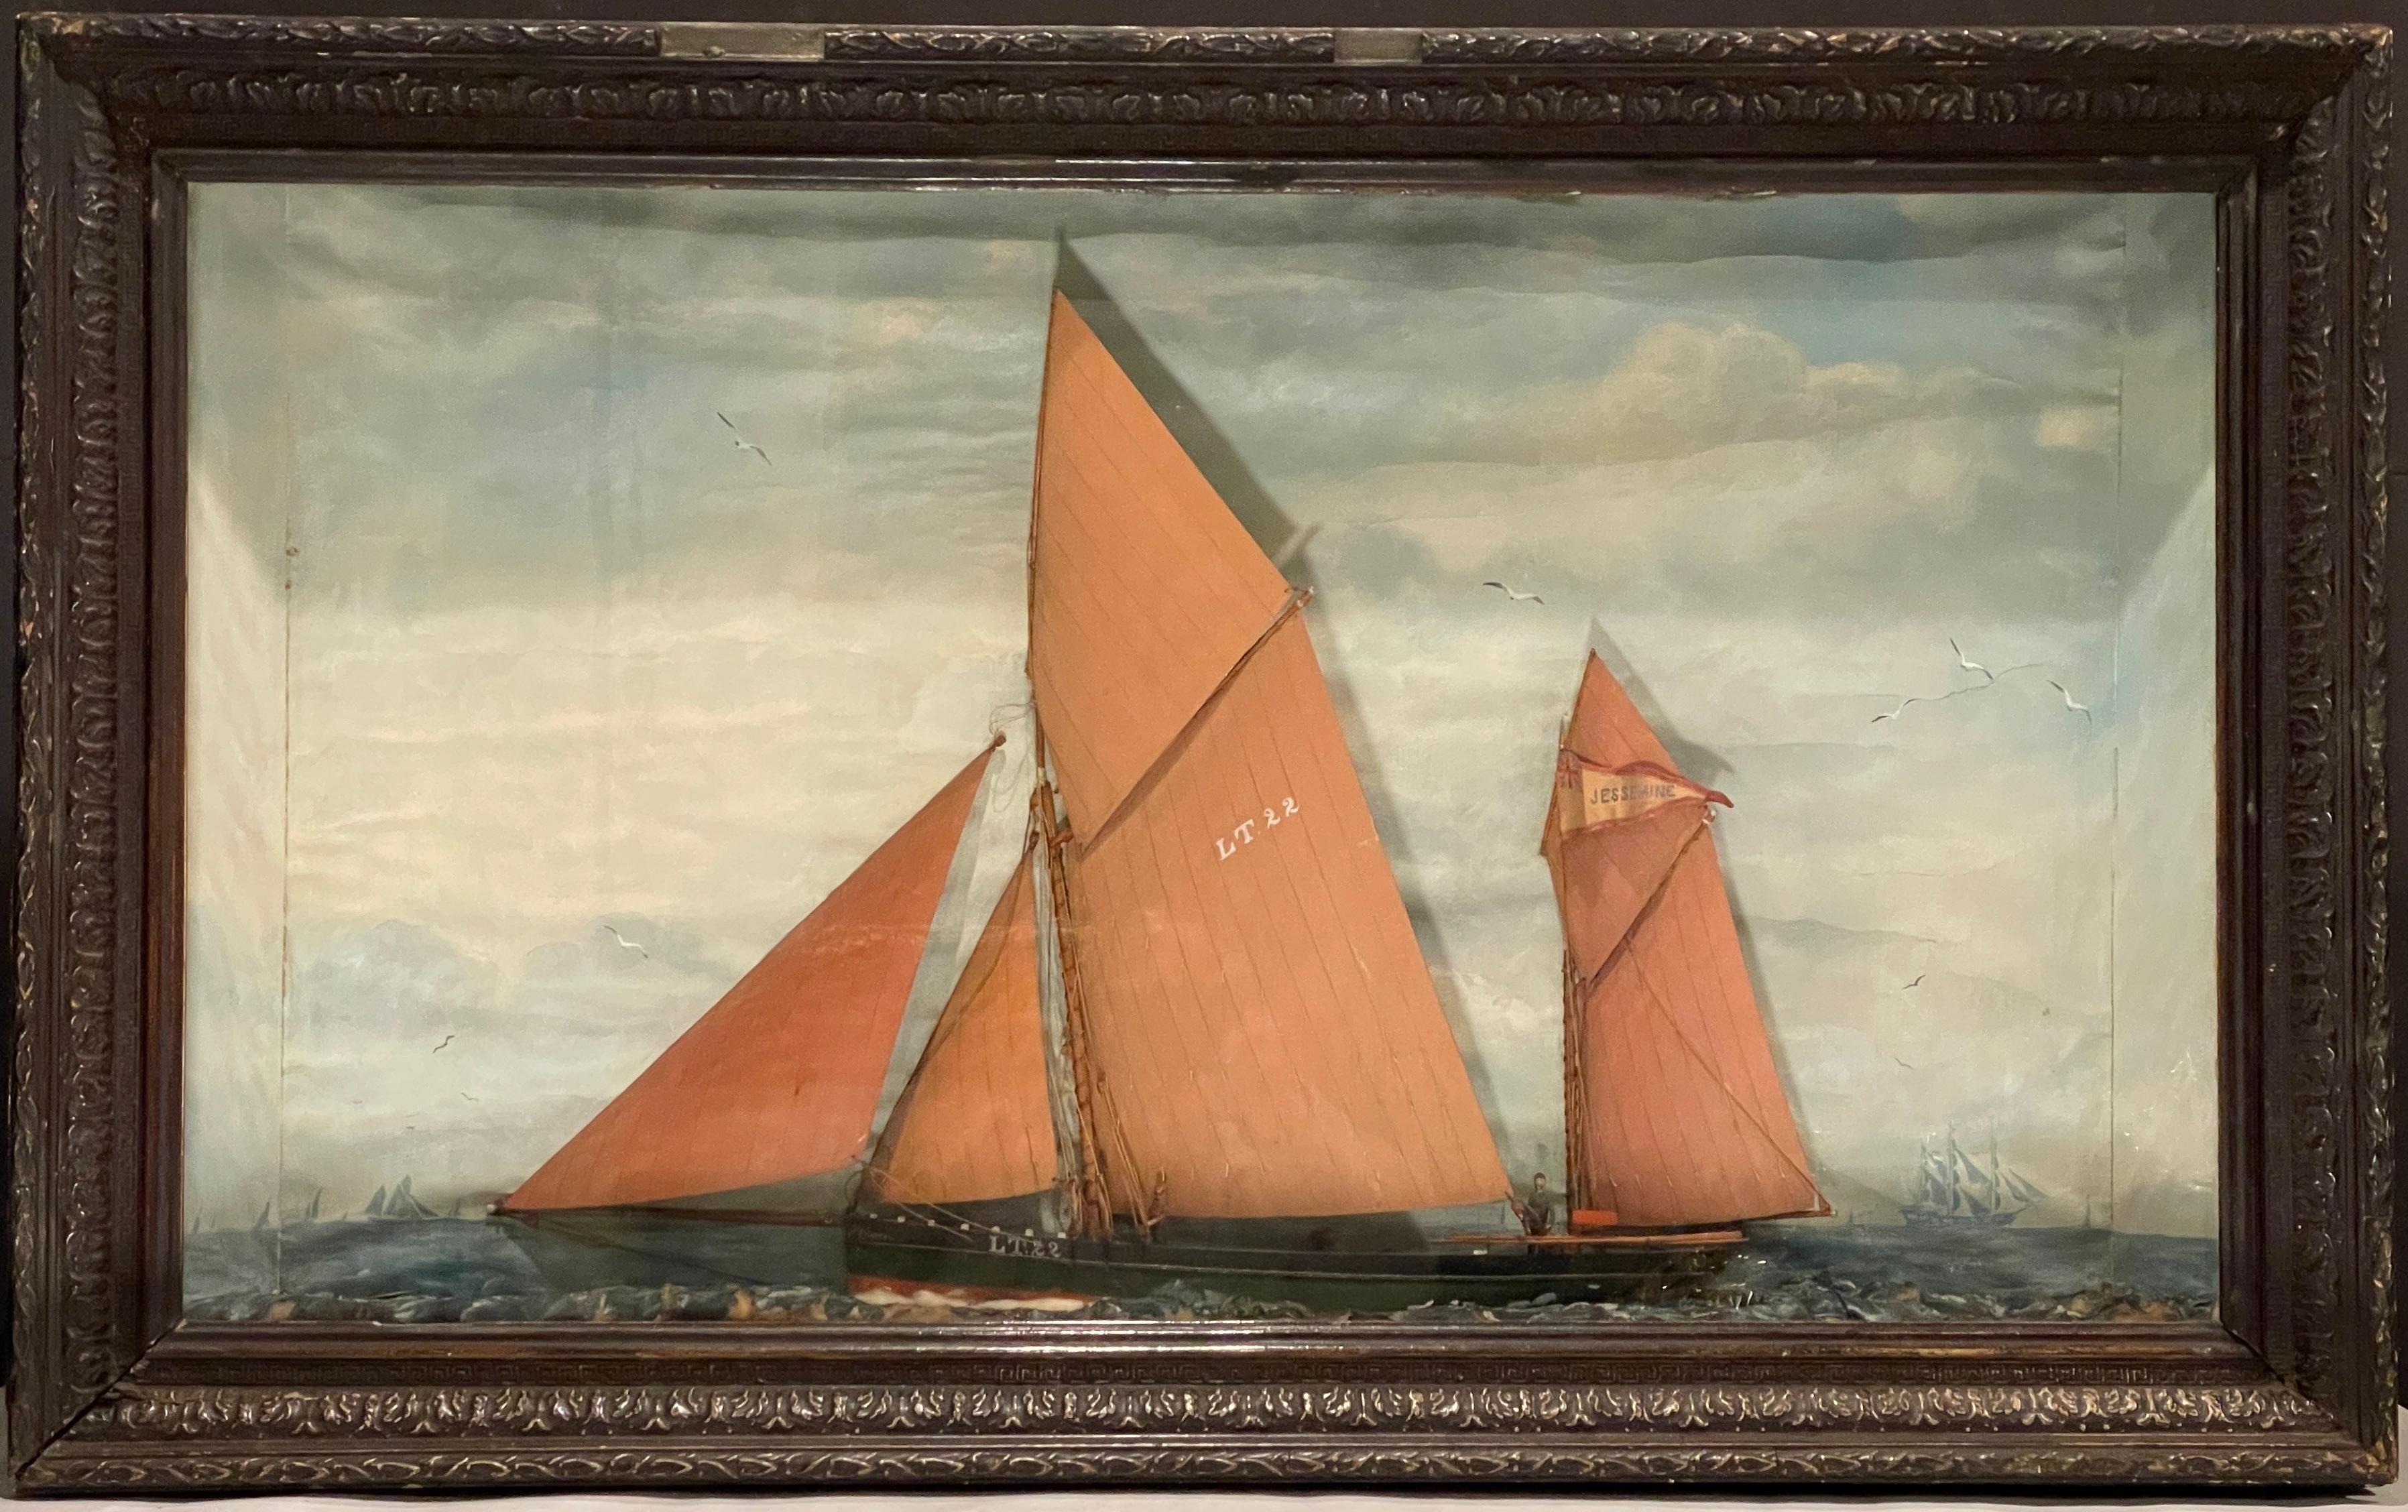 George Vempley Burwood British (1844-1917) signed and dated. Sailing ship, schooner diorama shadow box with figures and painted background.